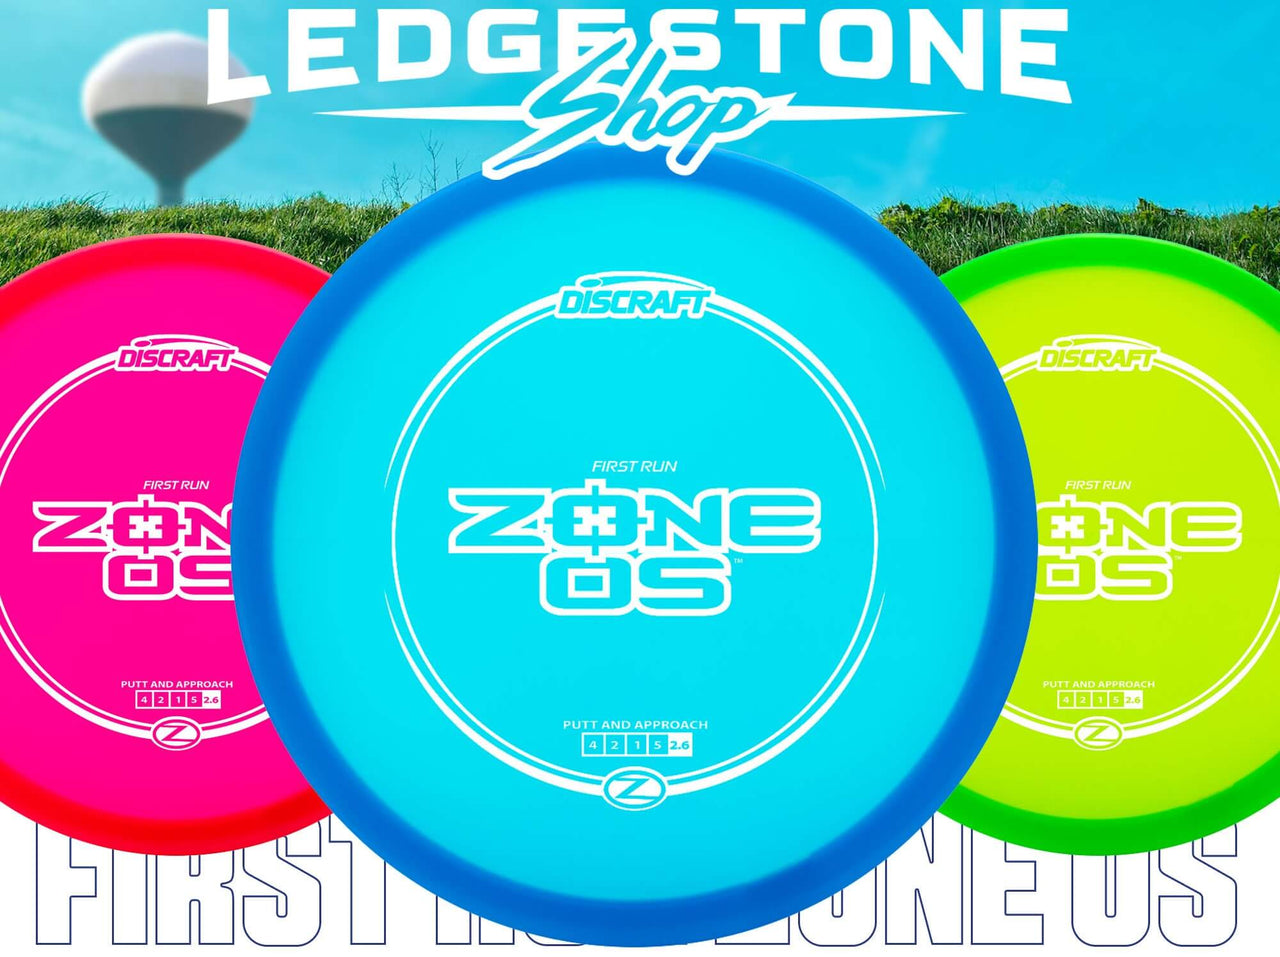 The Zone OS - Certified Beef from Discraft